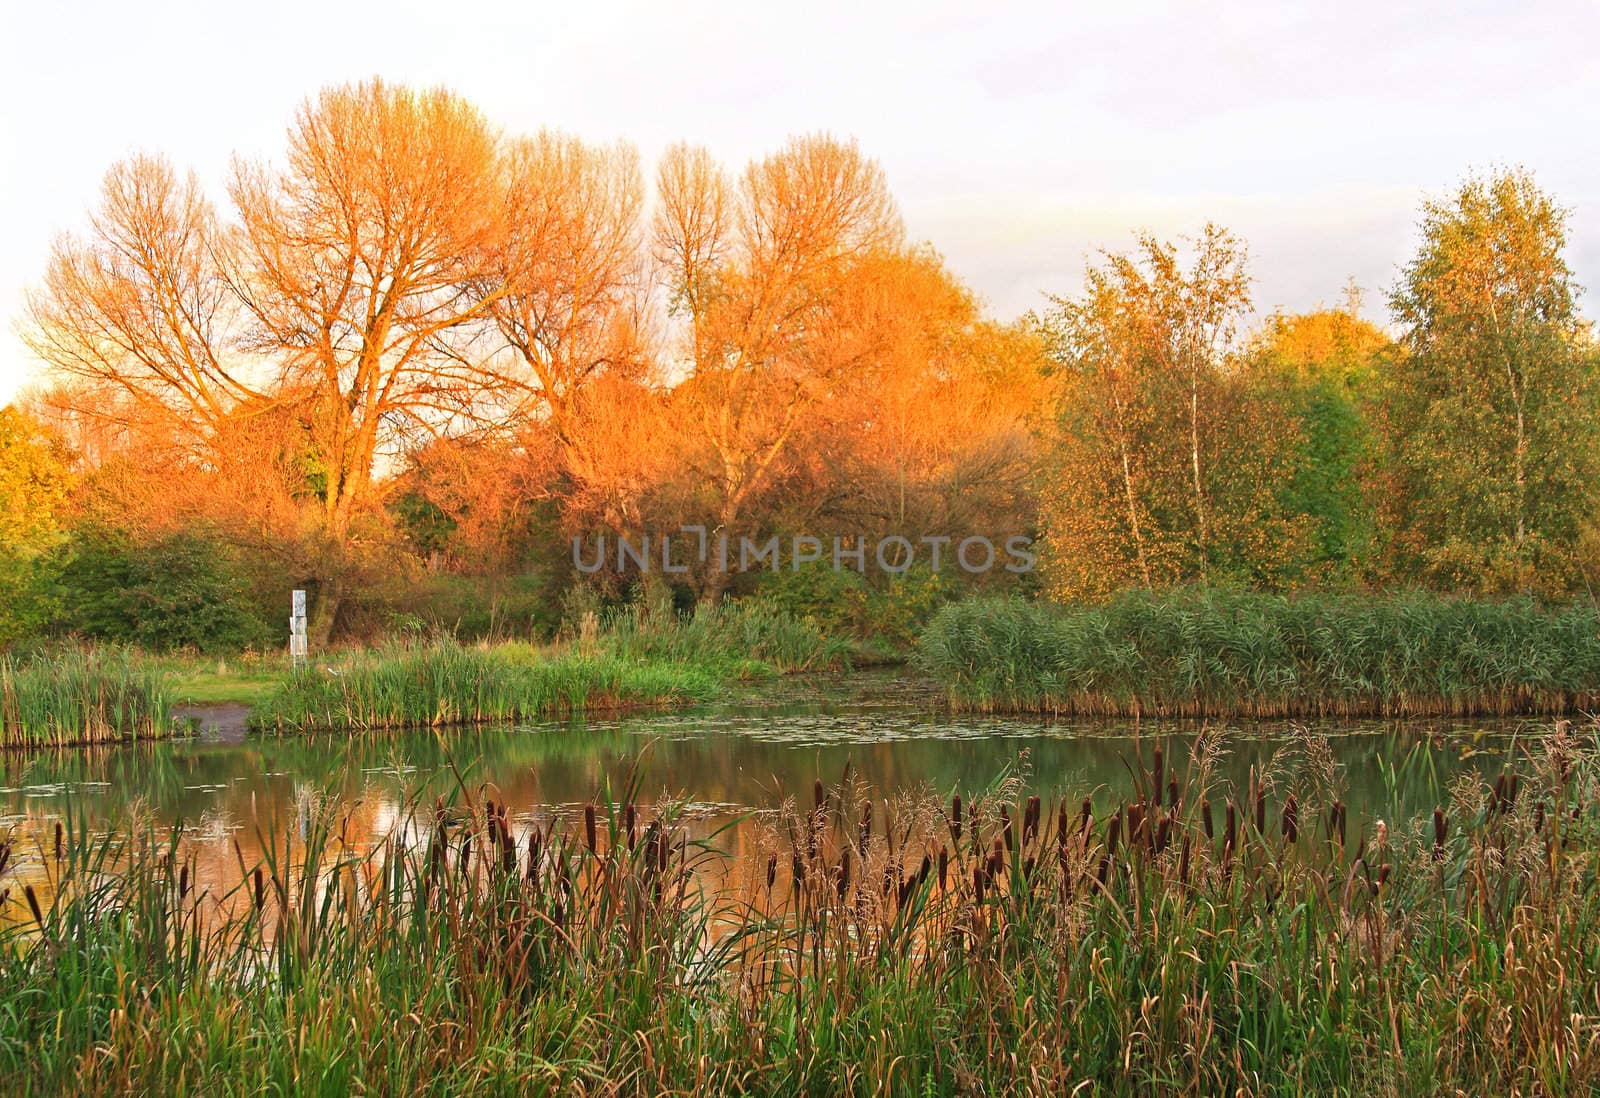 Sunny Tree - Picturesque autumn landscape of lake and bright trees